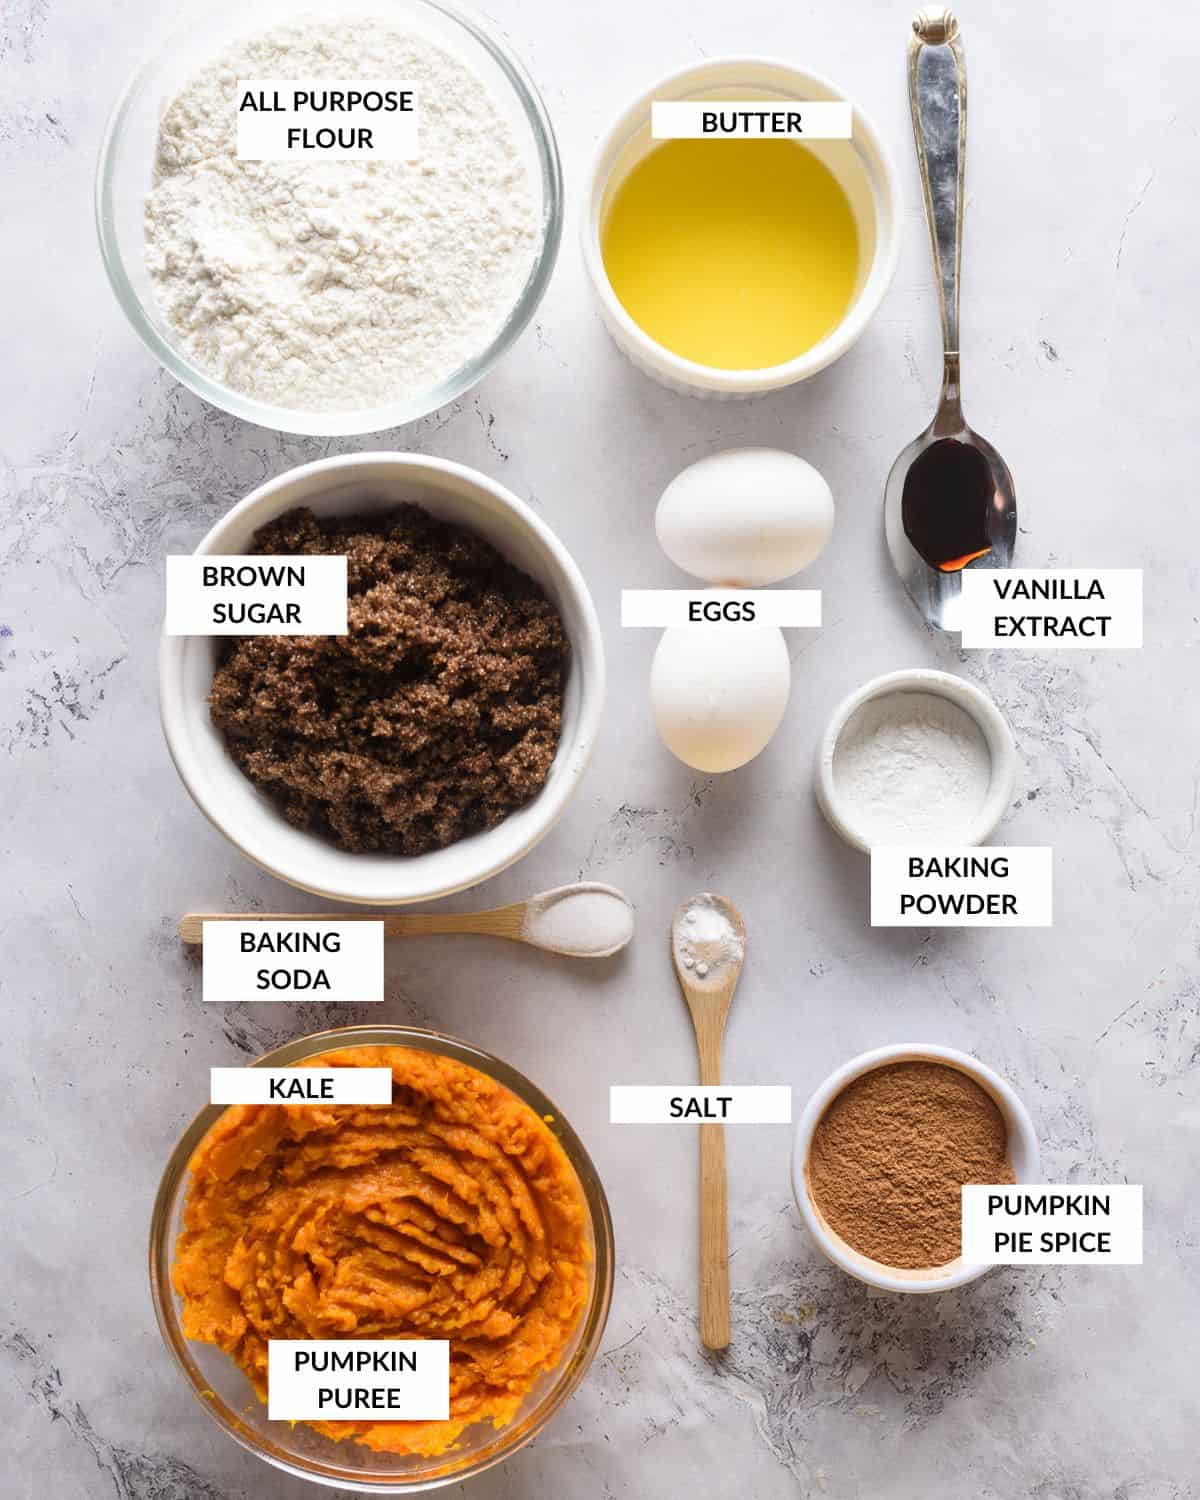 Labeled ingredients list for the pumpkin muffin - check recipe card for details!